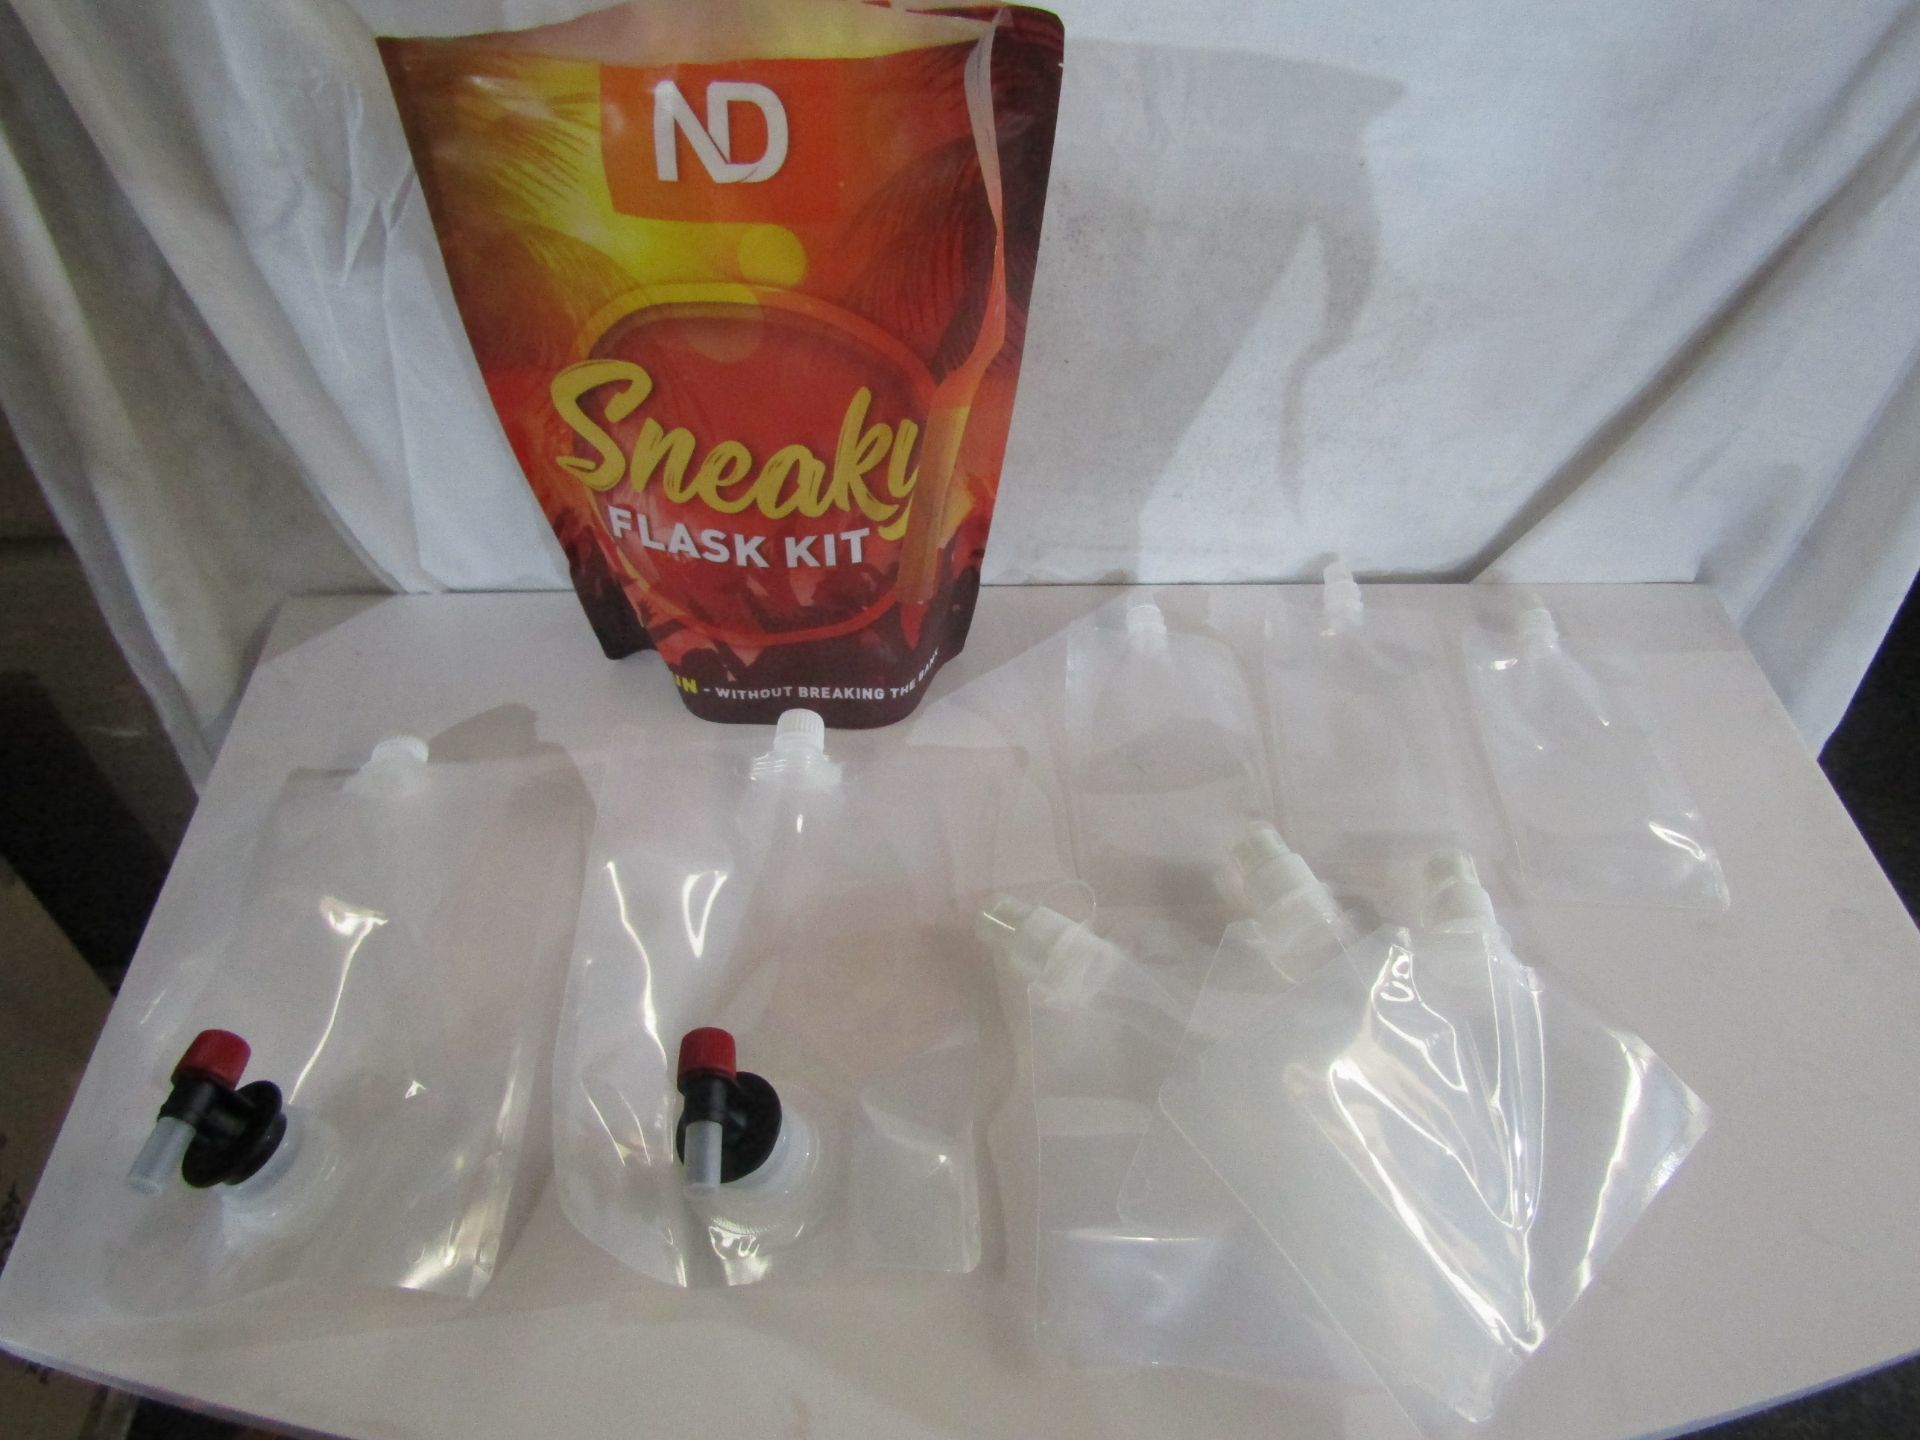 5x Nordic Creations - Sneaky Flask Kits - All New & Packaged.